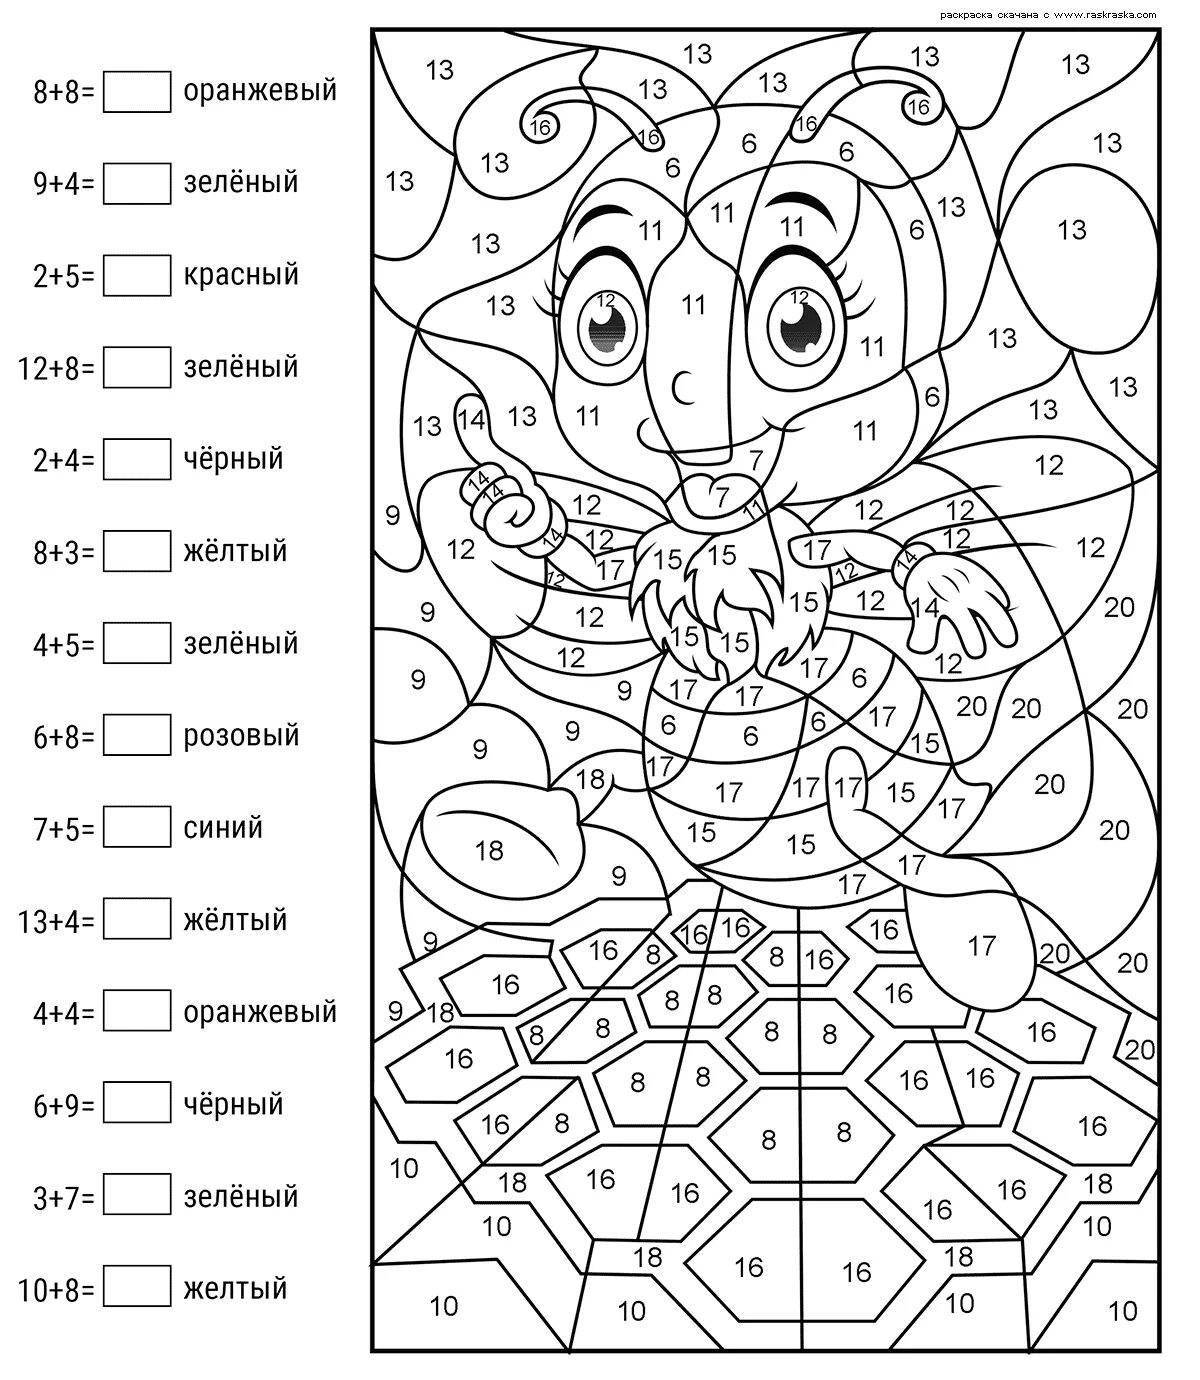 Splendid calculate coloring page for girls